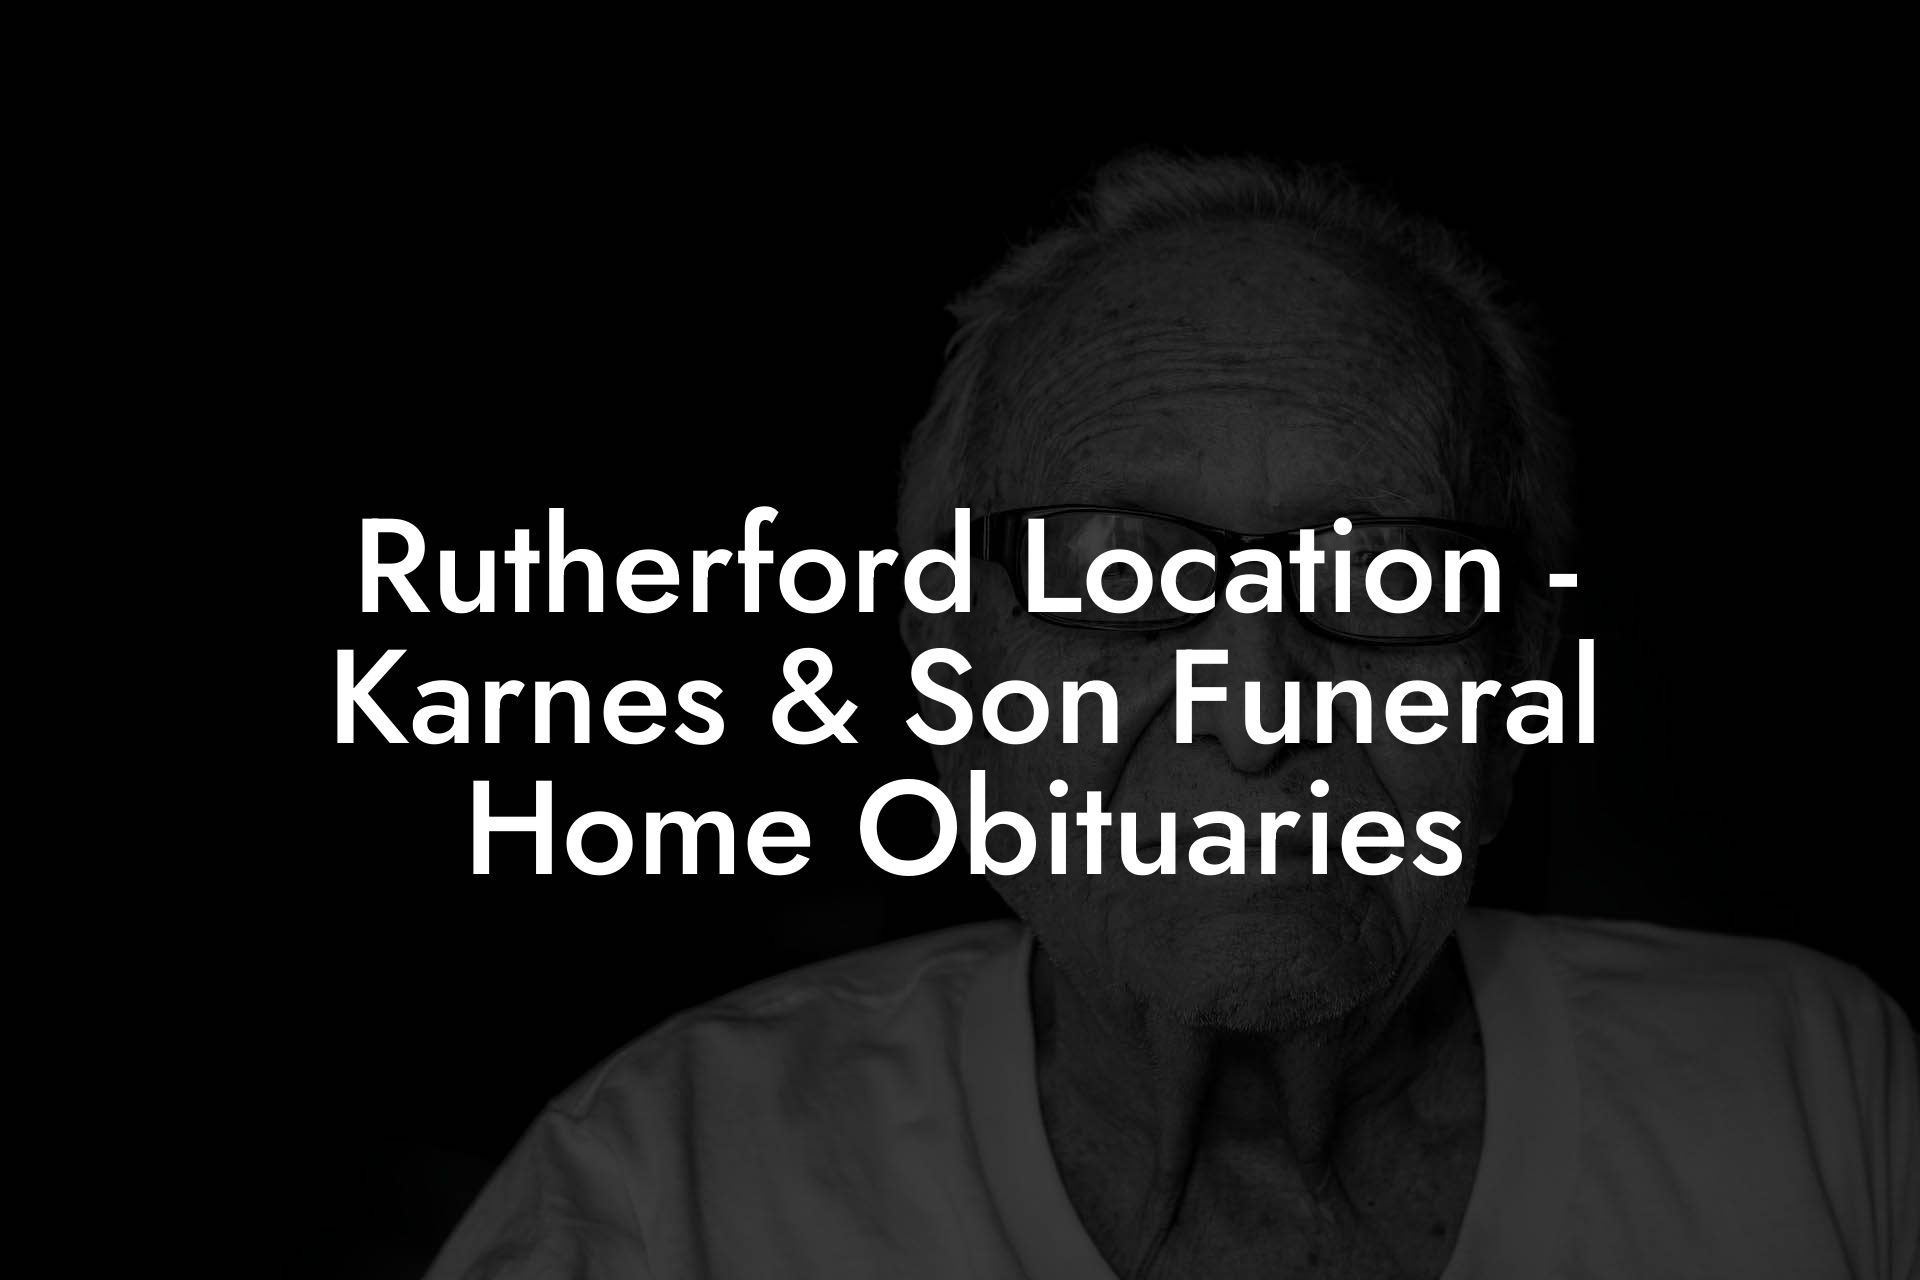 Rutherford Location - Karnes & Son Funeral Home Obituaries